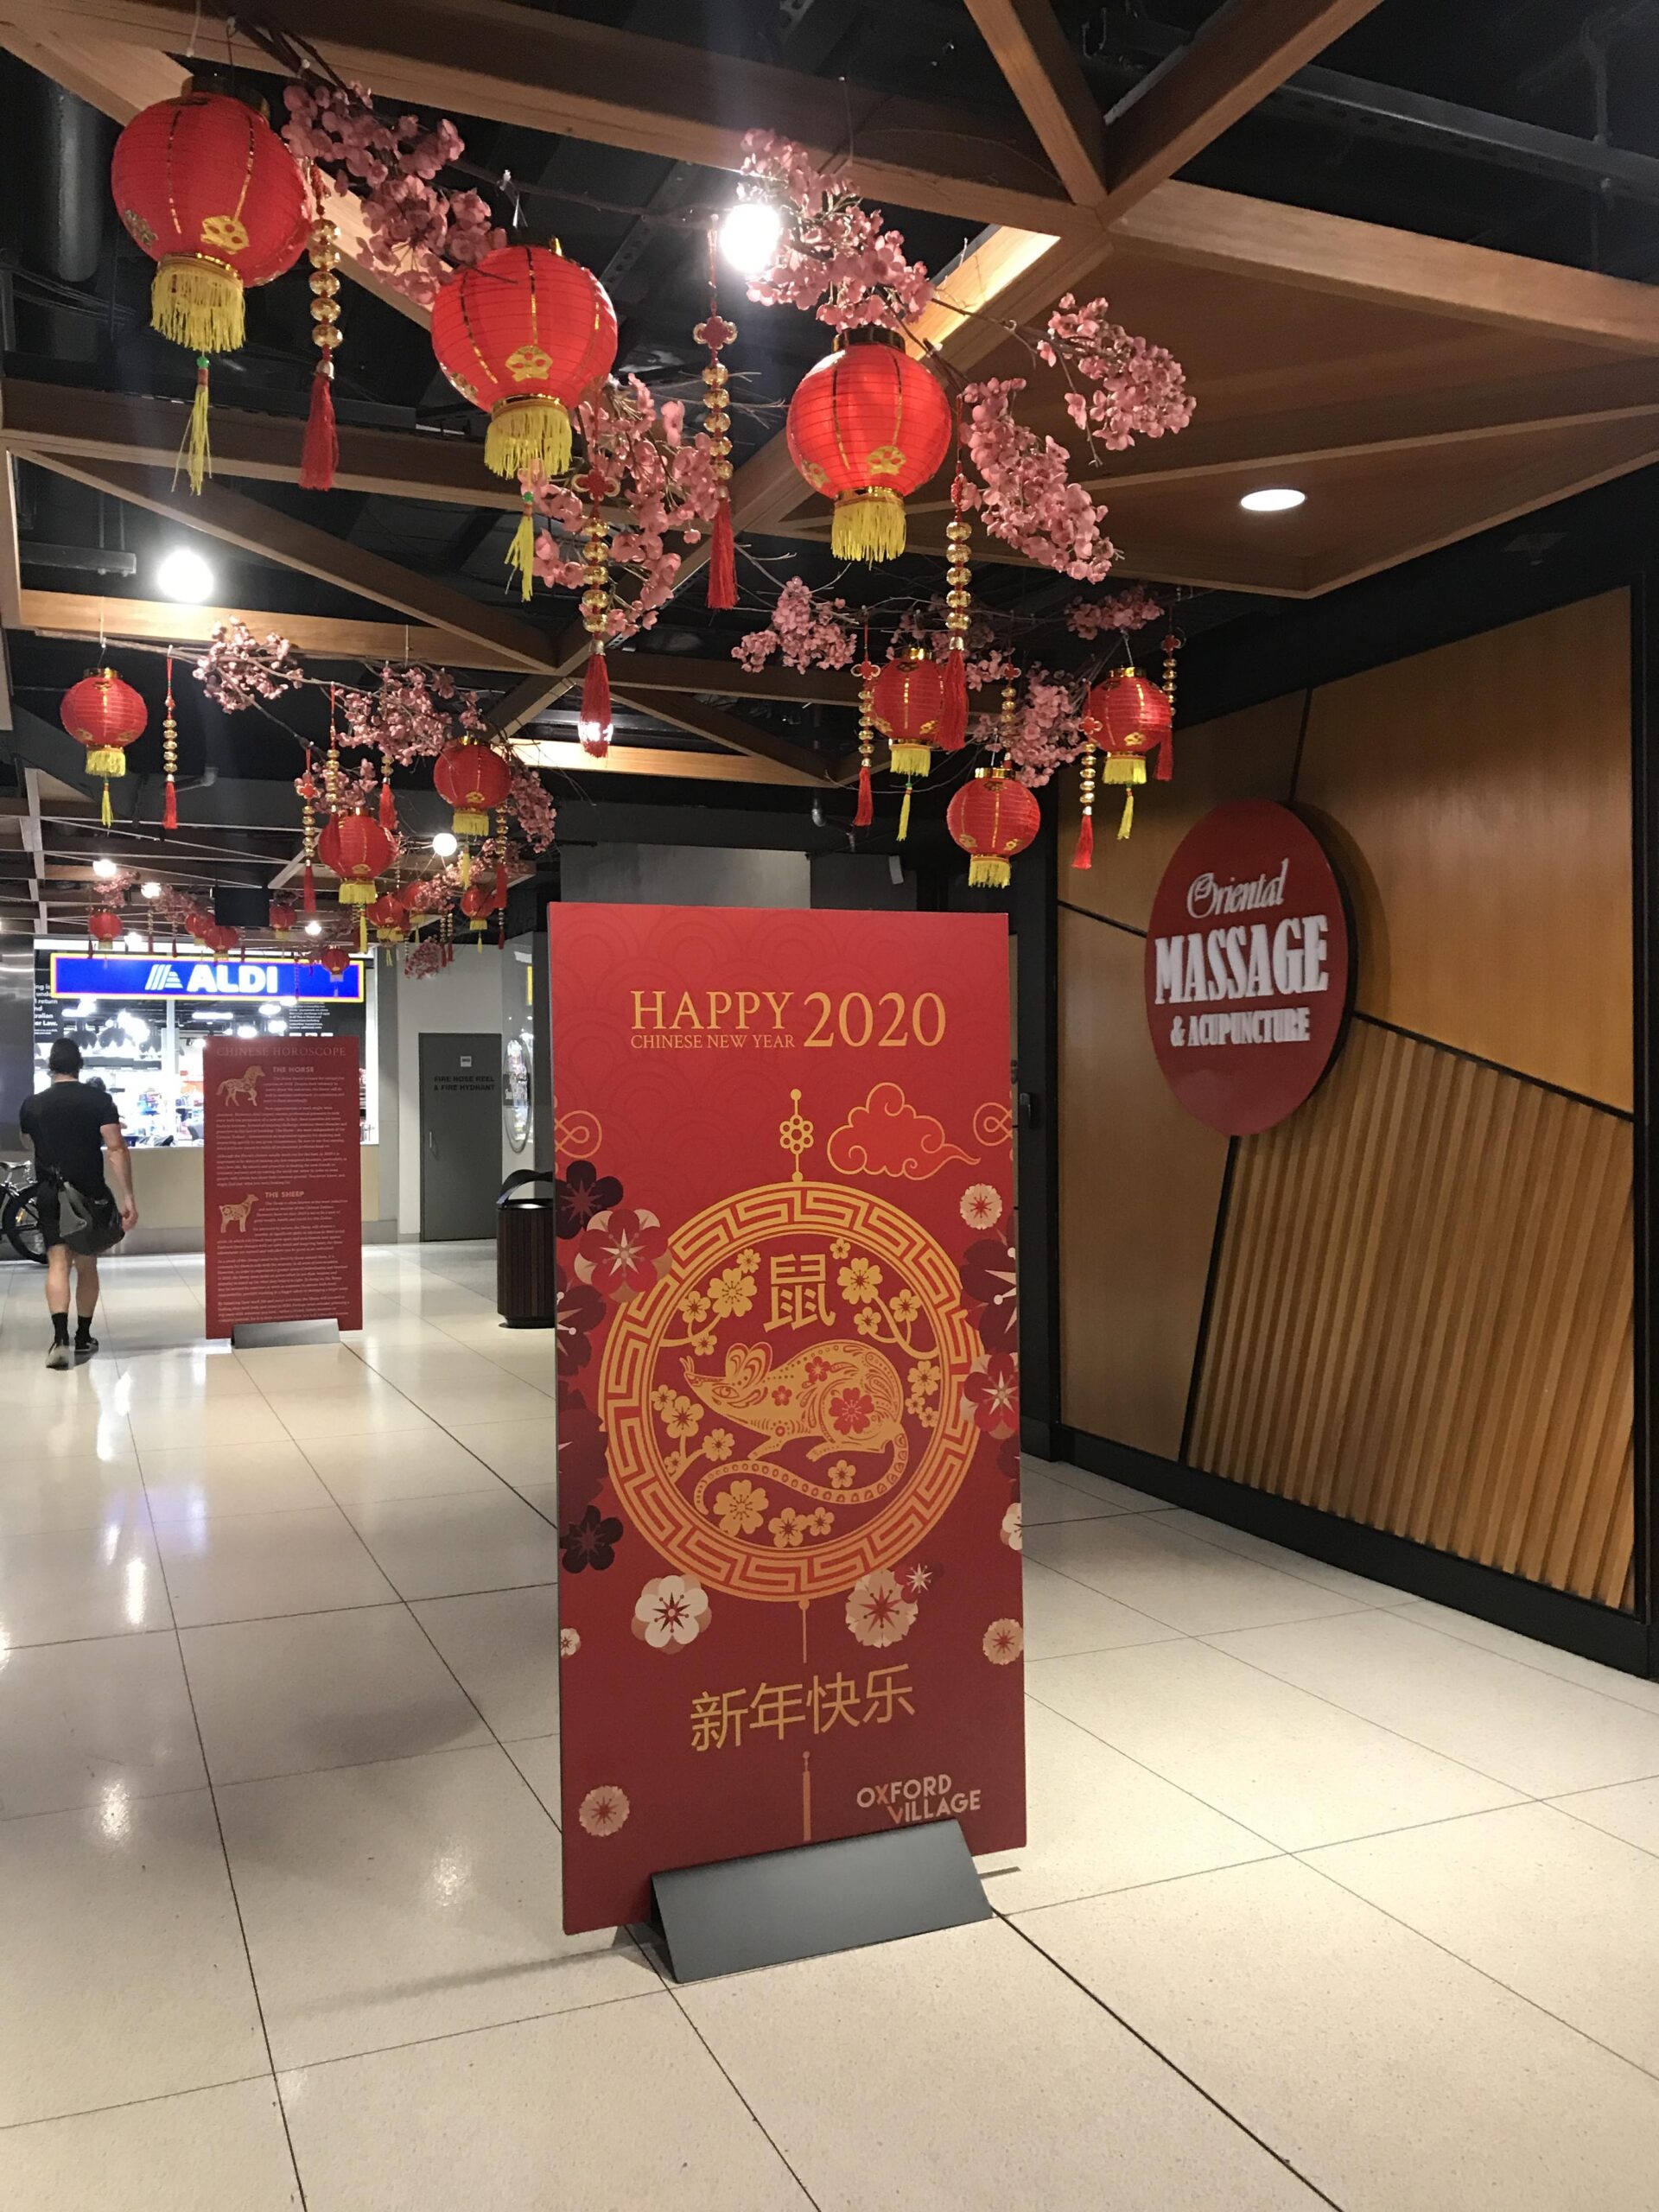 Lunar New Year at Oxford St Mall